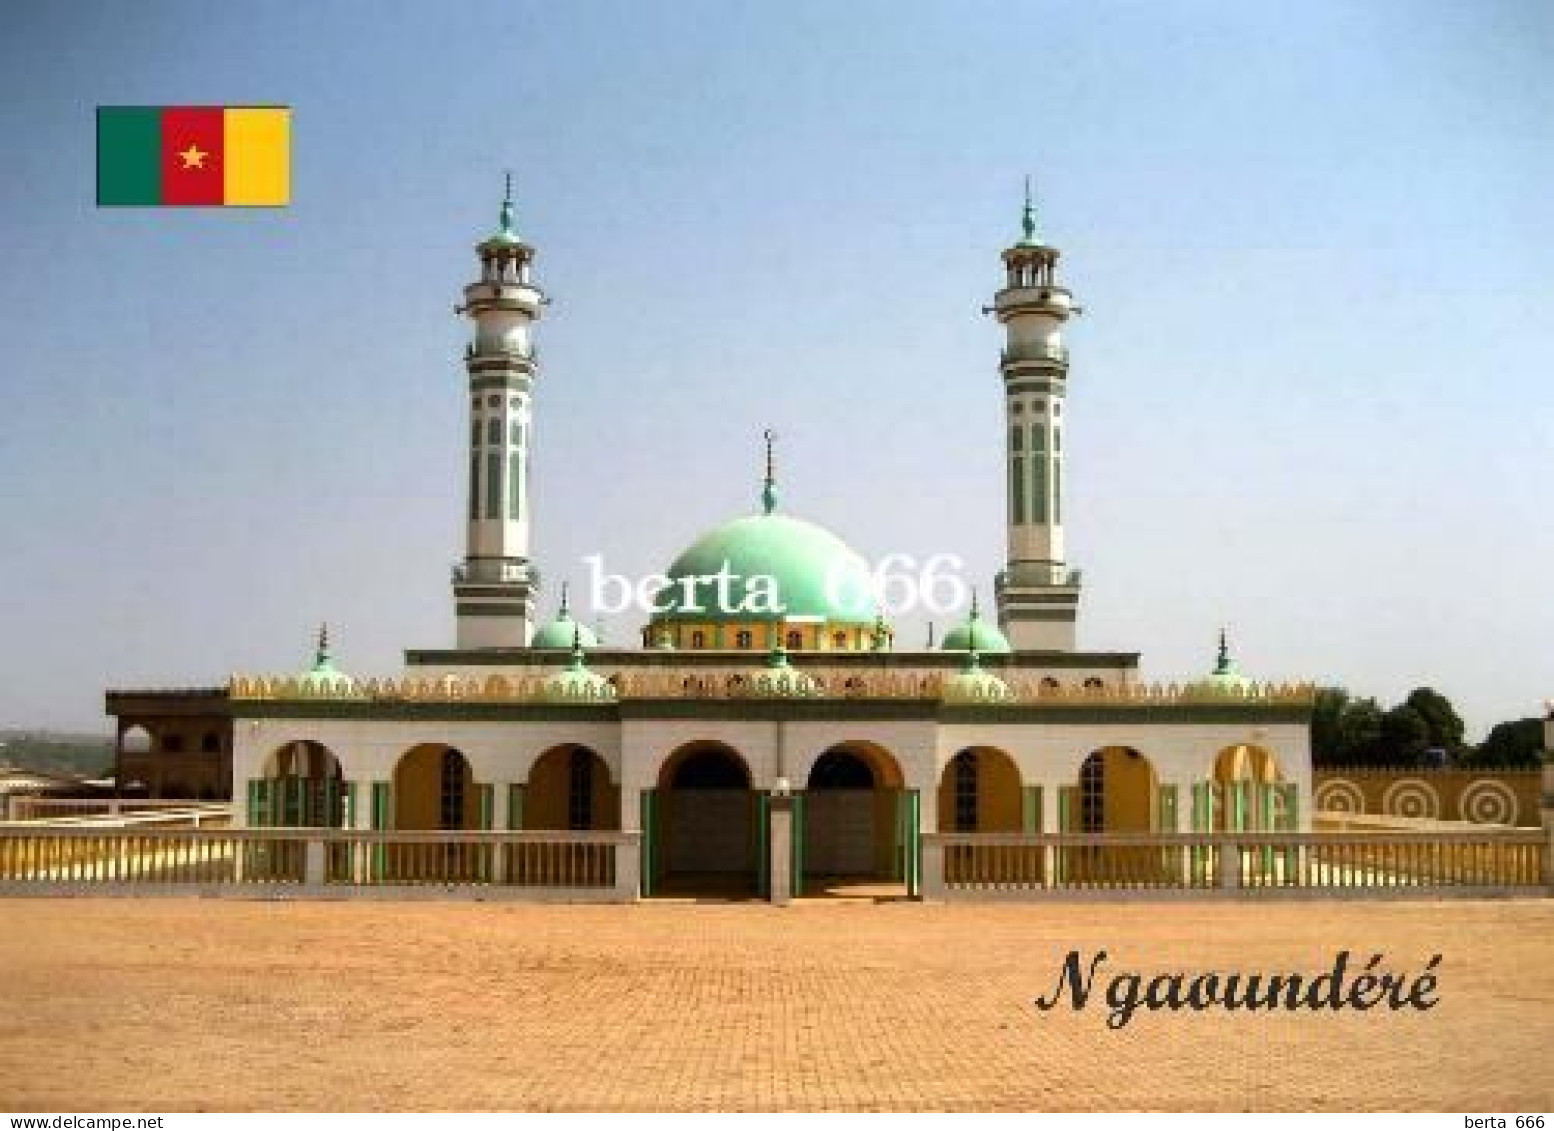 Cameroon Ngaoundere Mosque New Postcard - Cameroon